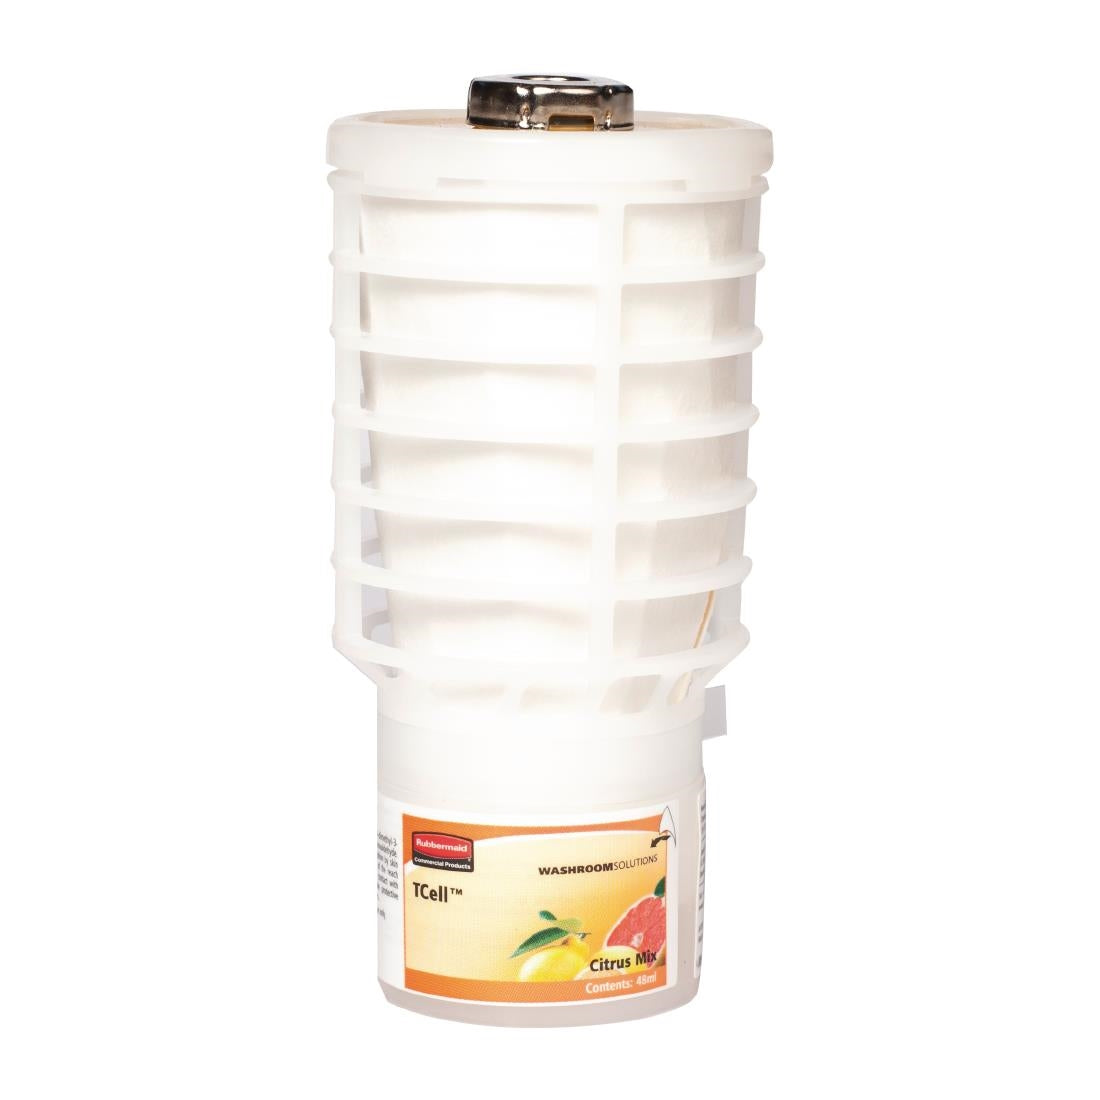 FT578 Rubbermaid TCell 1.0 Air Freshener Refill Citrus Mix JD Catering Equipment Solutions Ltd